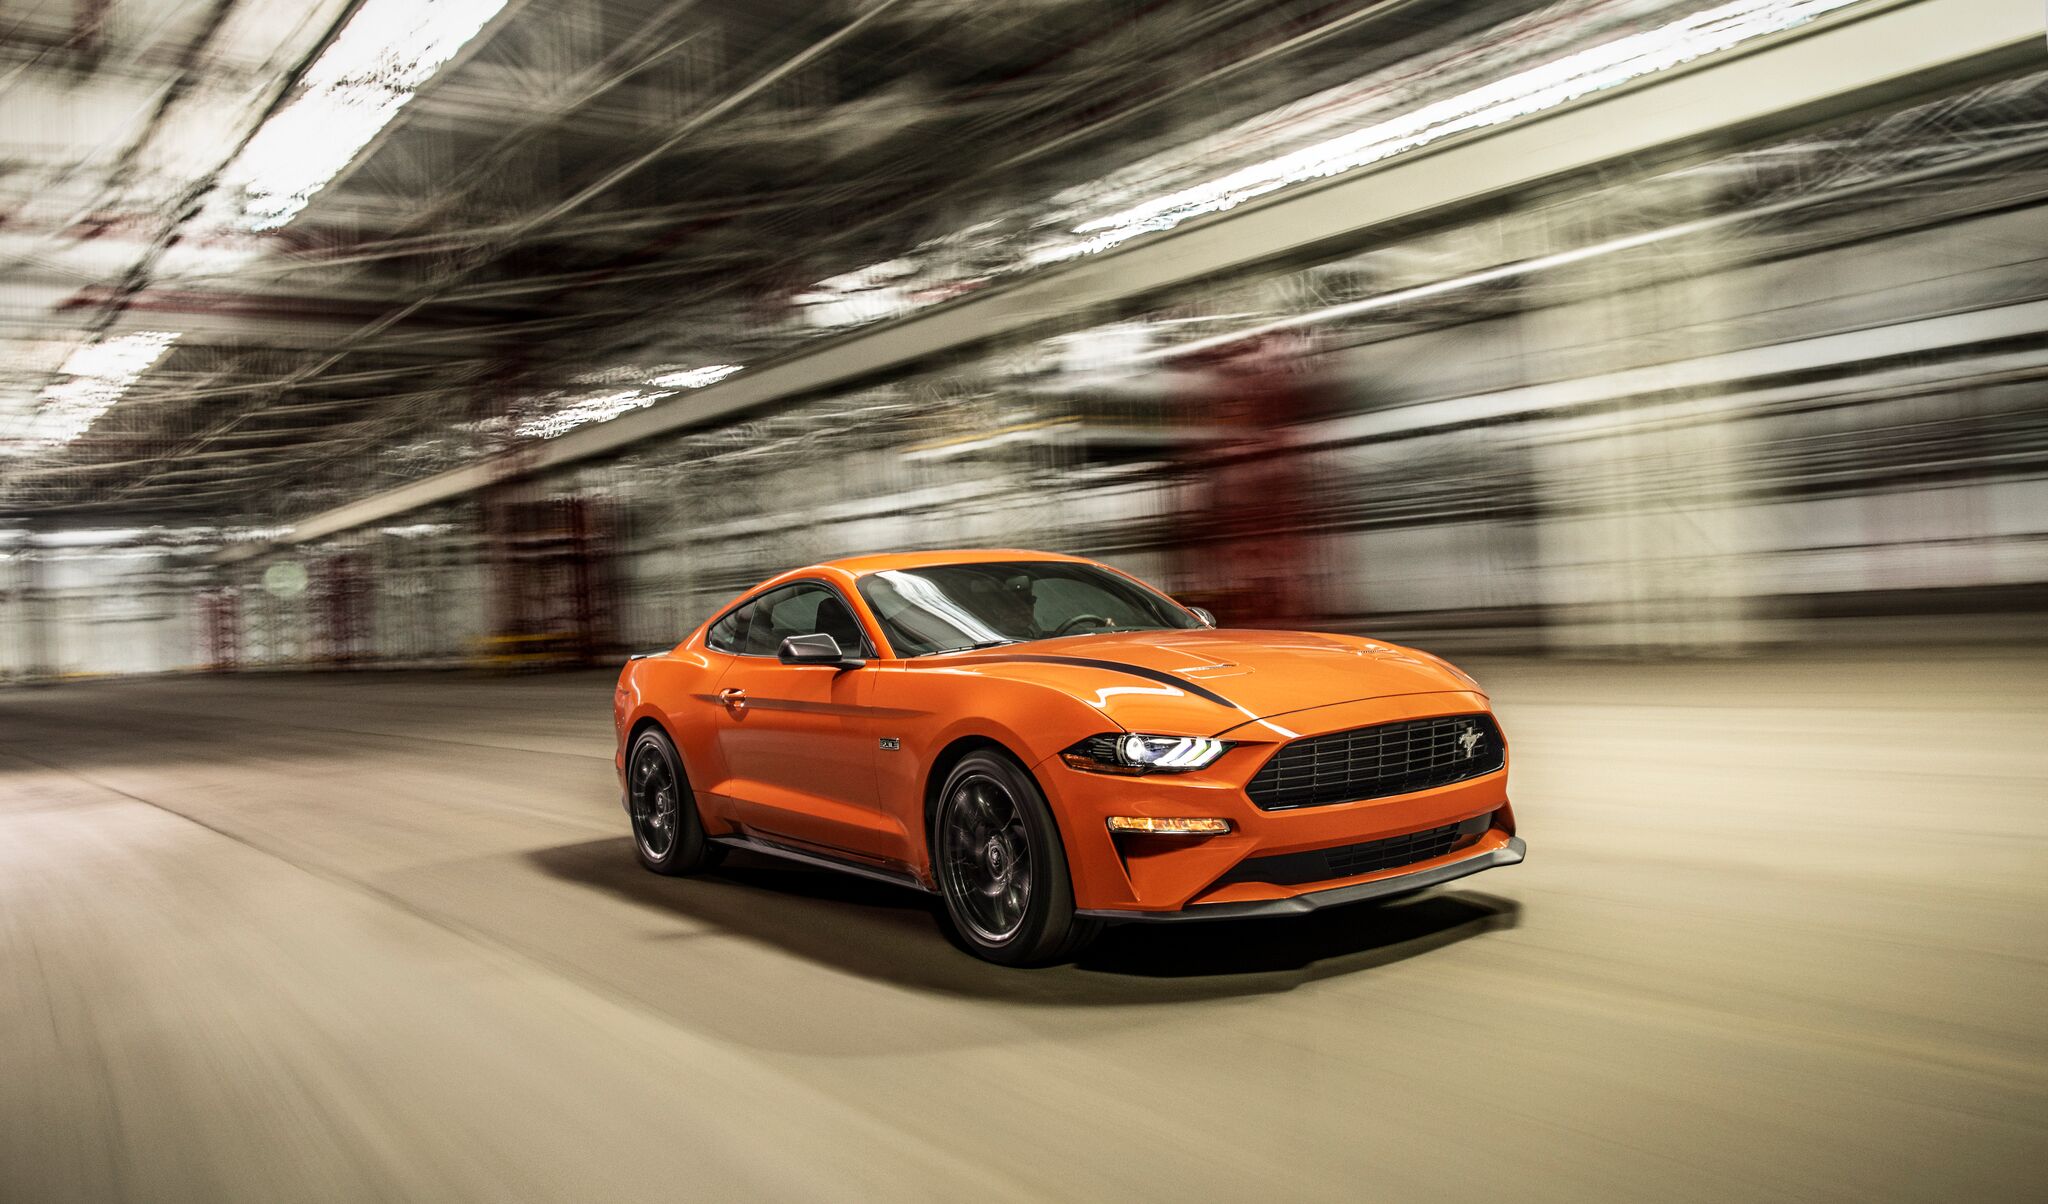 What Is The 2020 Mustang High Performance Package? - What Is The 2020 Mustang High Performance Package?